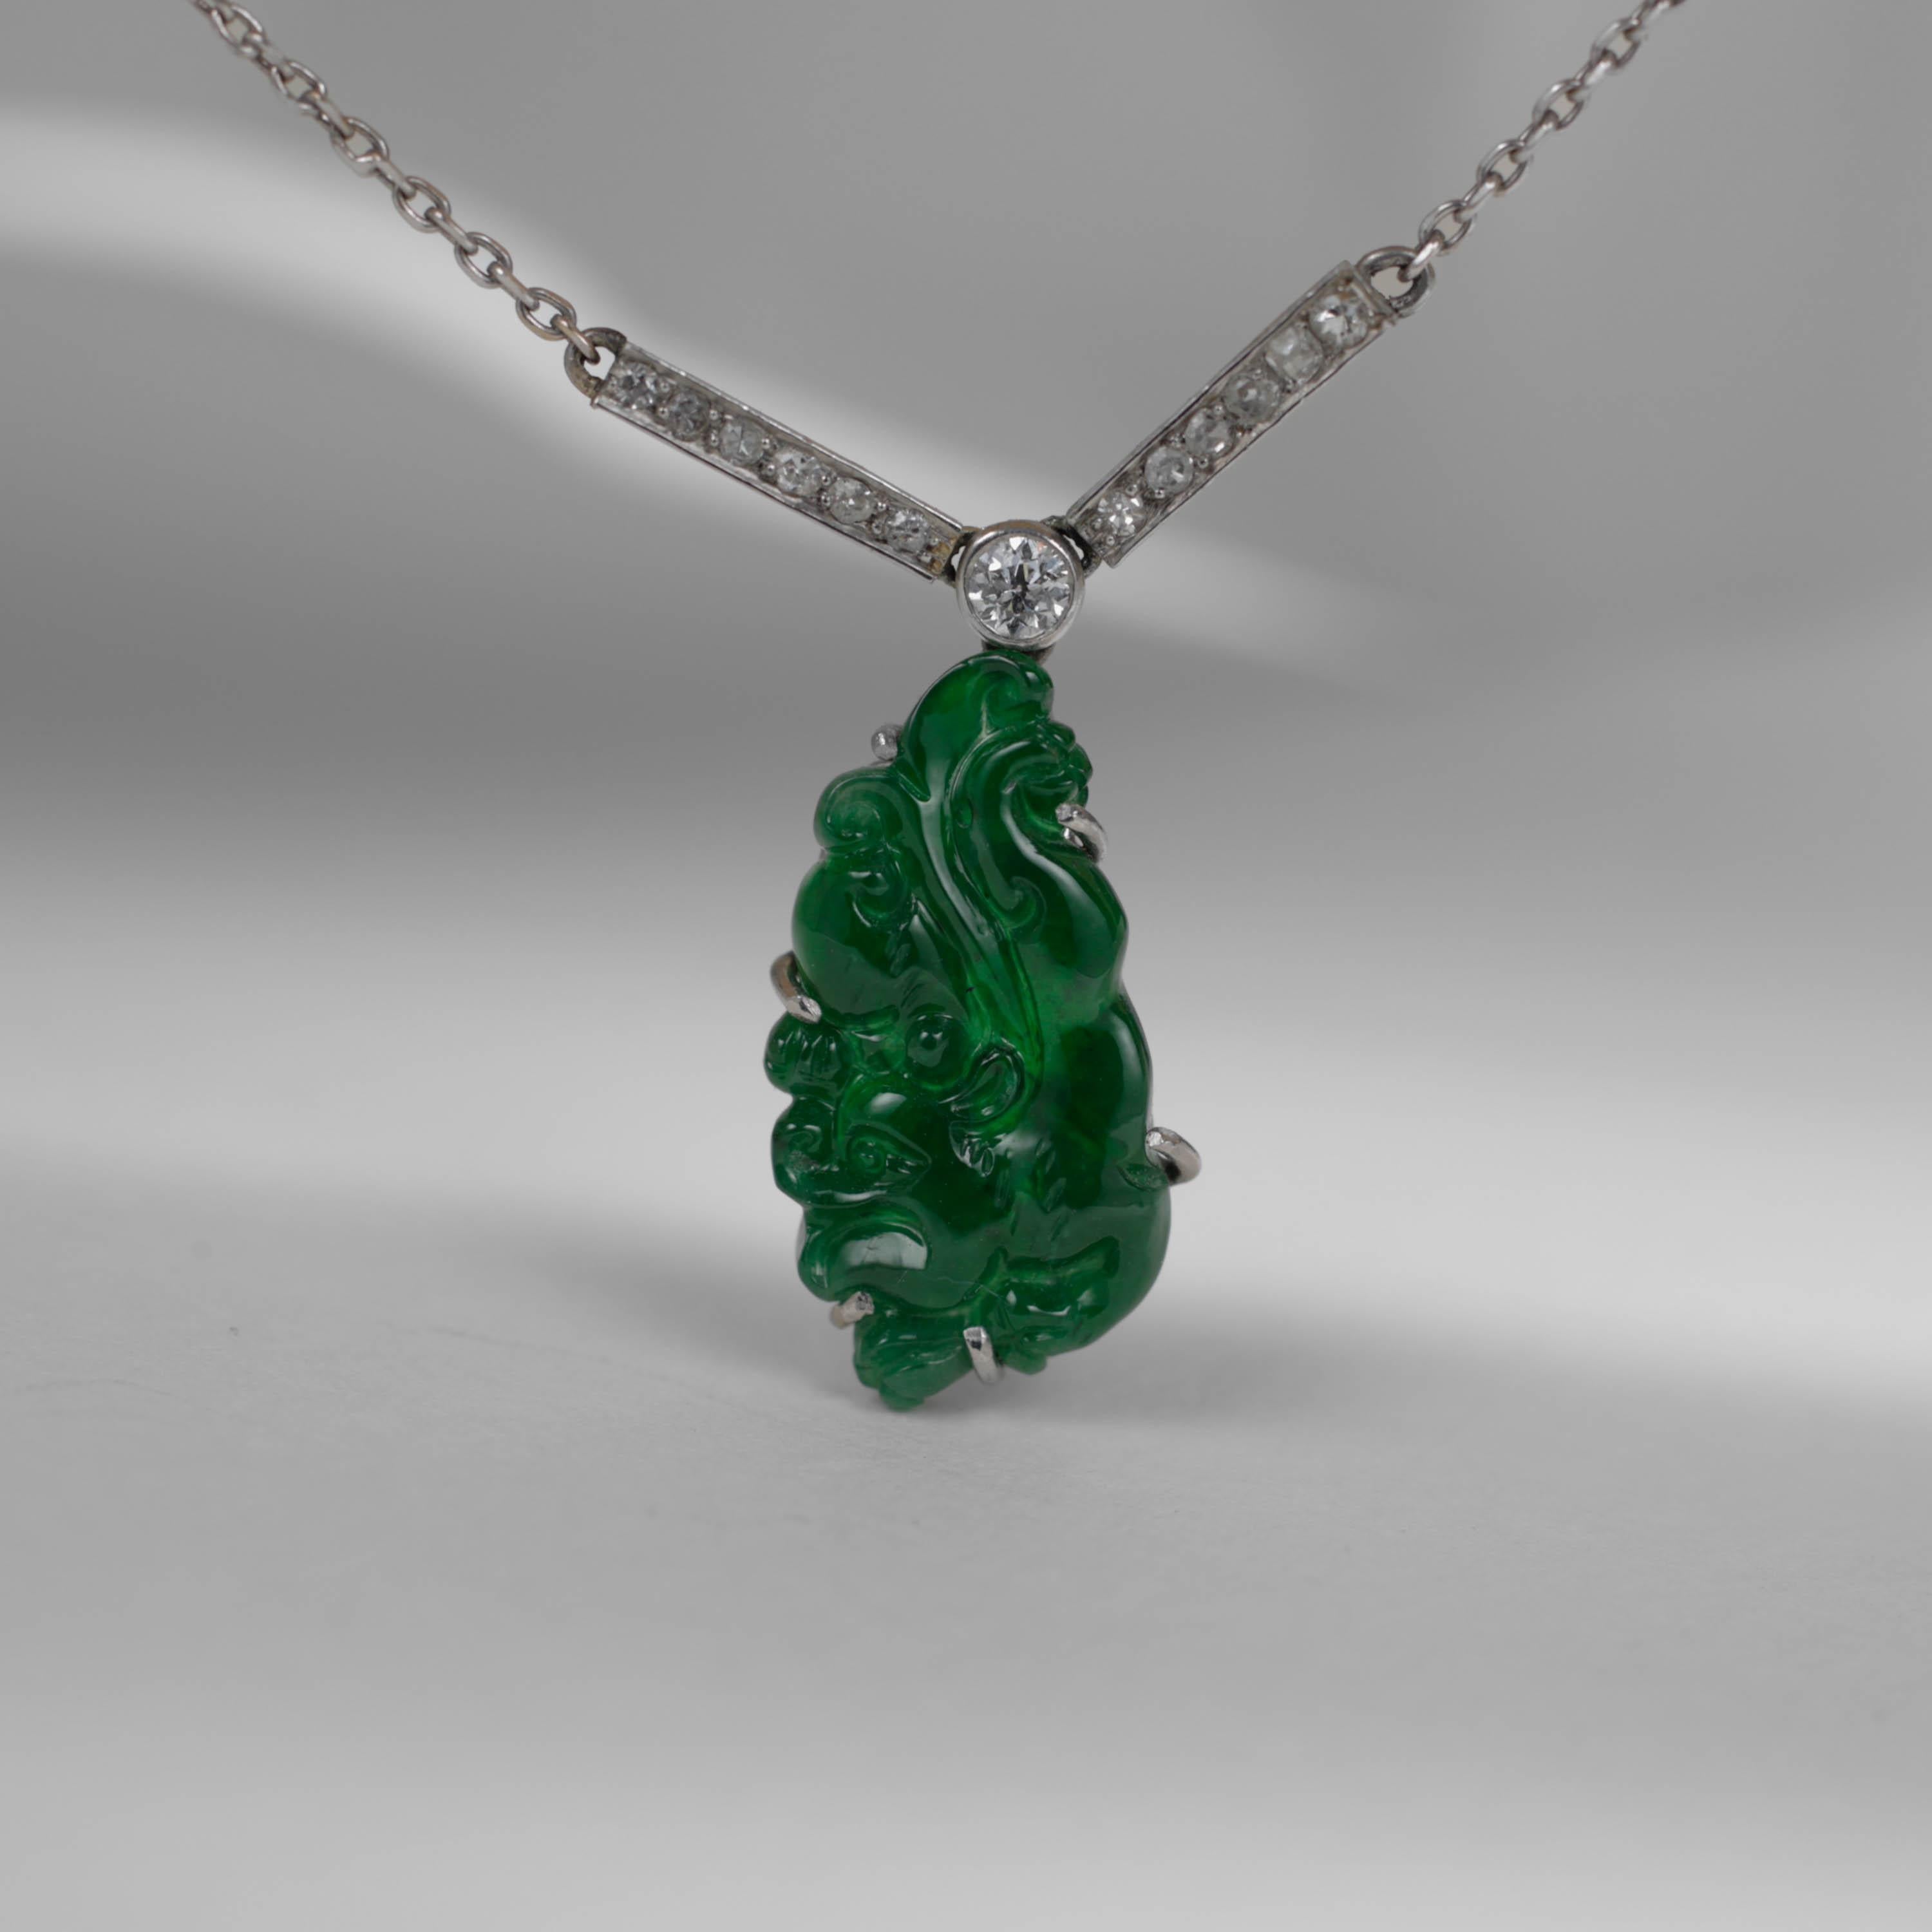 Created in the 1920s, this magnificent pendant features the very rarest of the rare: a GIA-certified natural and untreated jadeite jade that displays a rich, emerald green color and high translucency. Jade this fine is exceedingly rare and is known